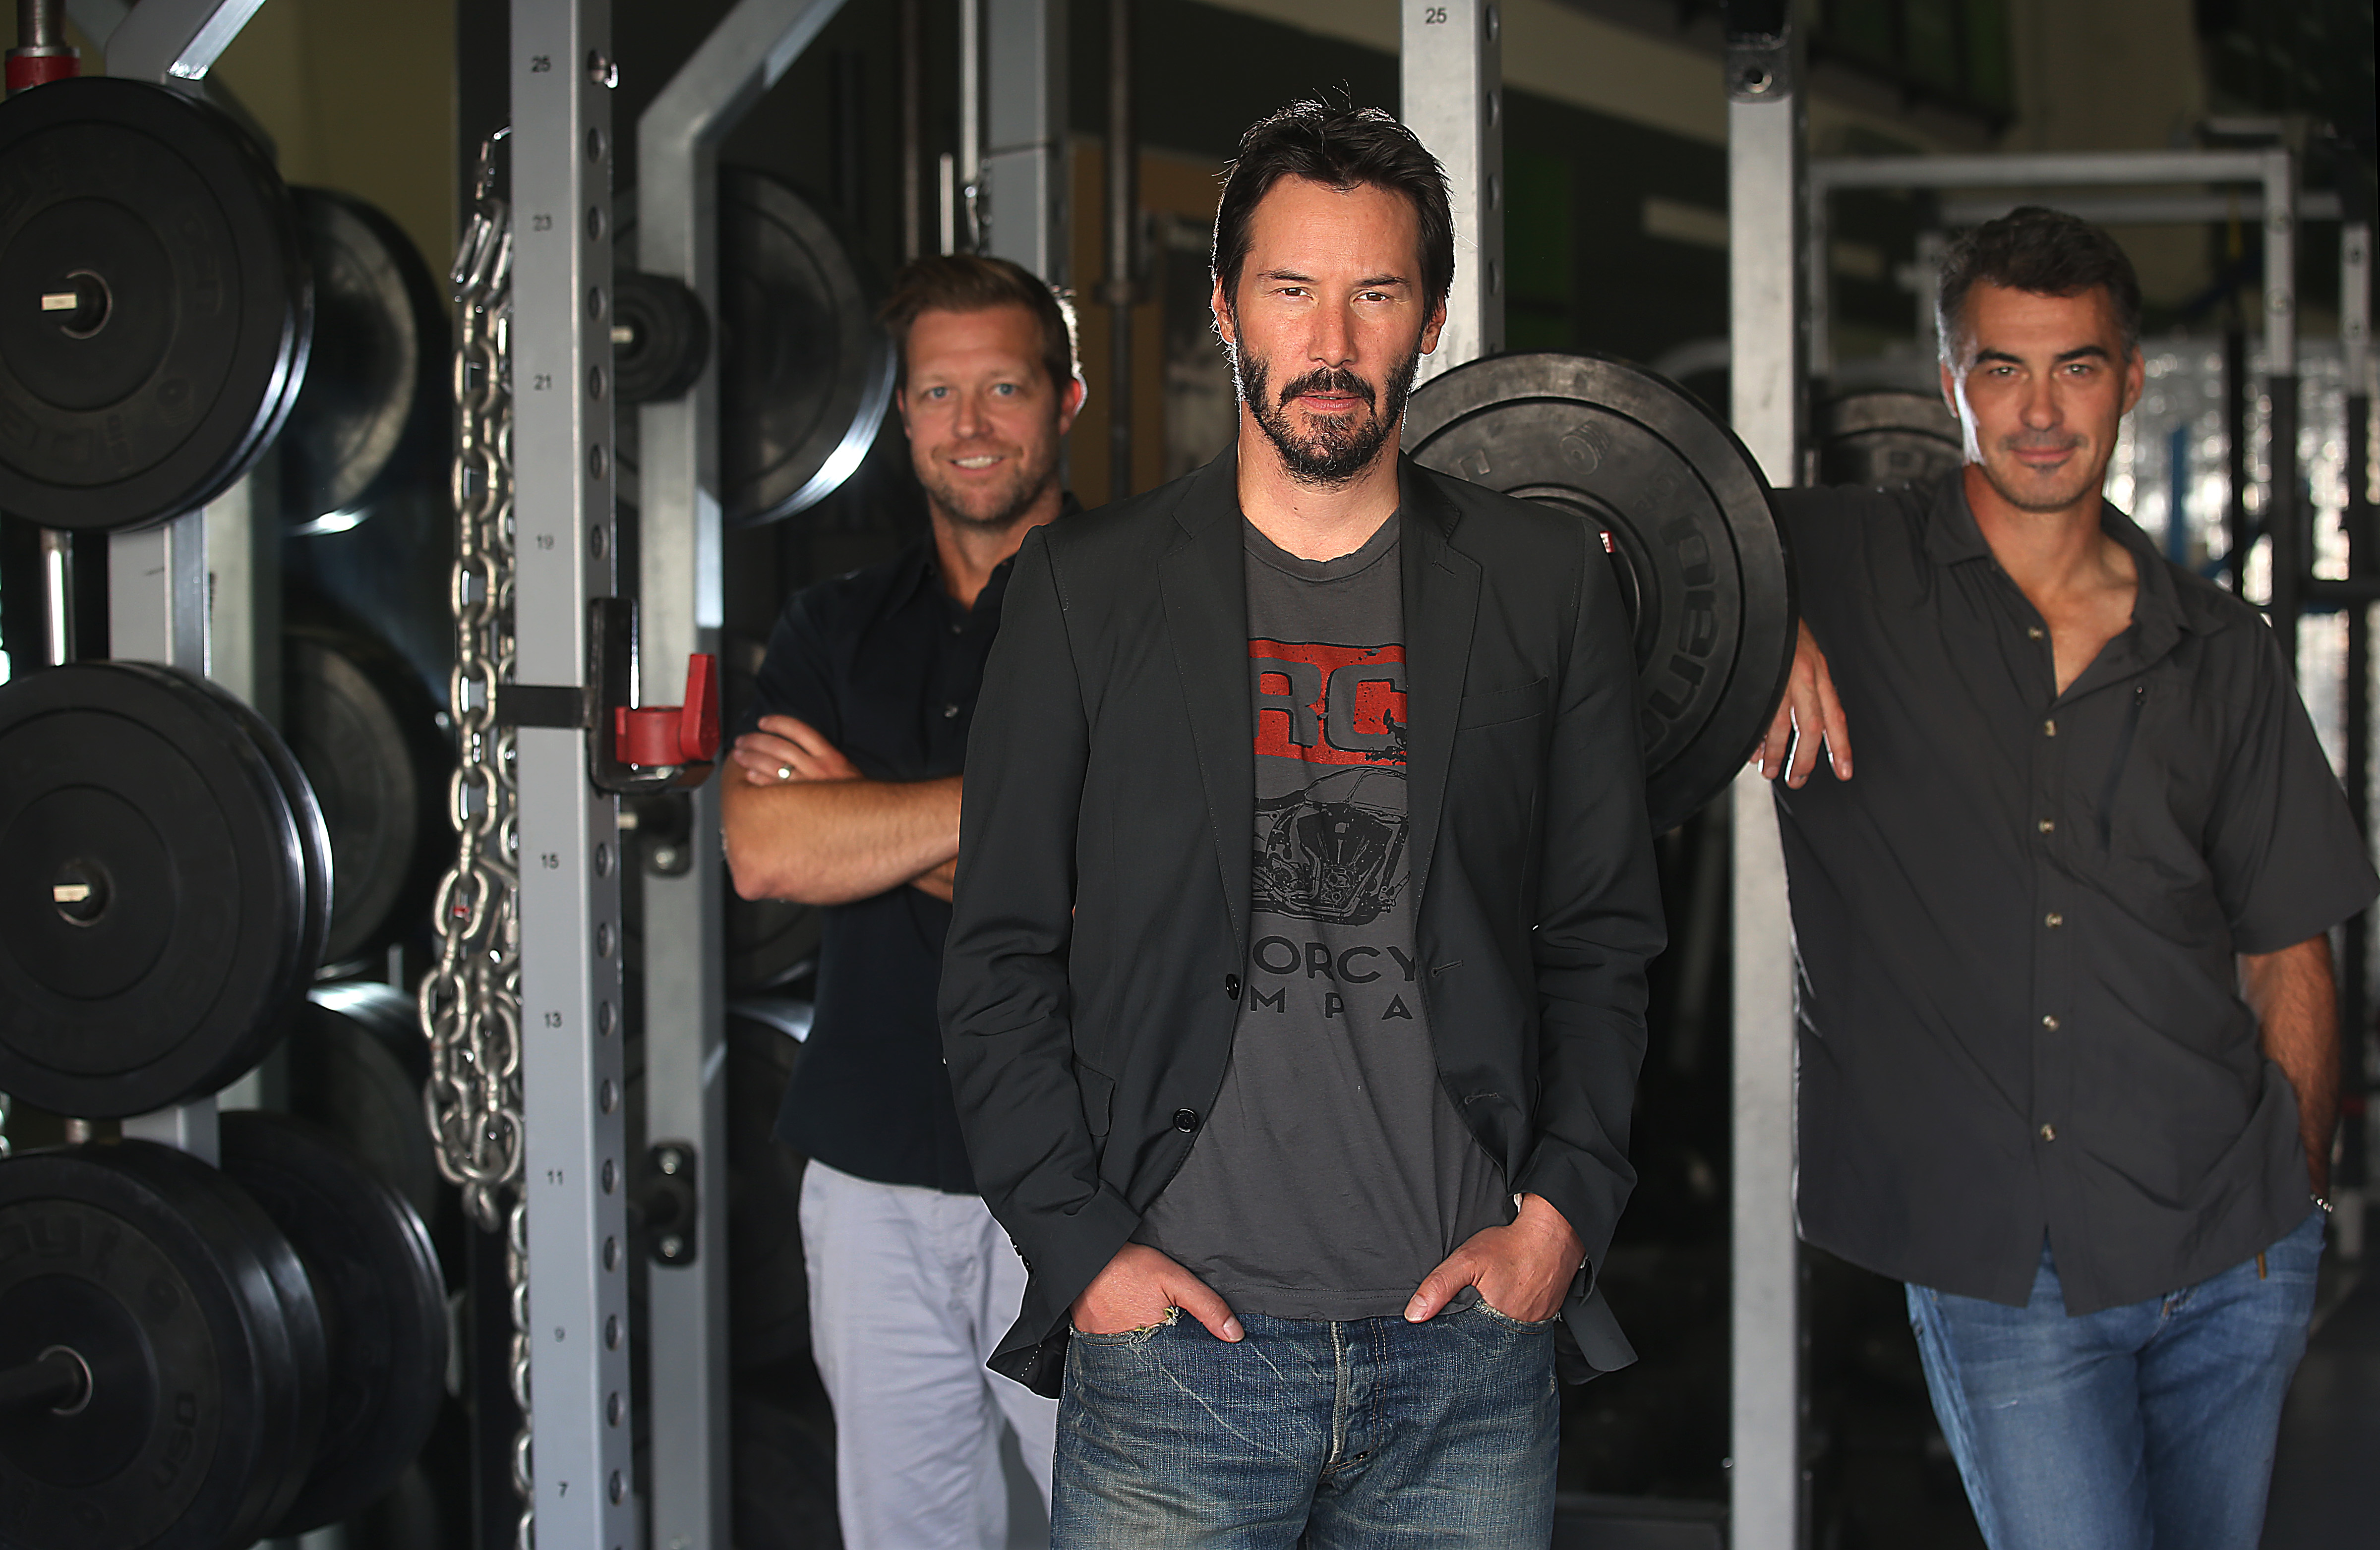 Keanu Reeves posing for a picture with stunt coordinators, David Leitch and Chad Stahelski, for "John Wick" in Inglewood, California on October 7, 2014 | Source: Getty Images